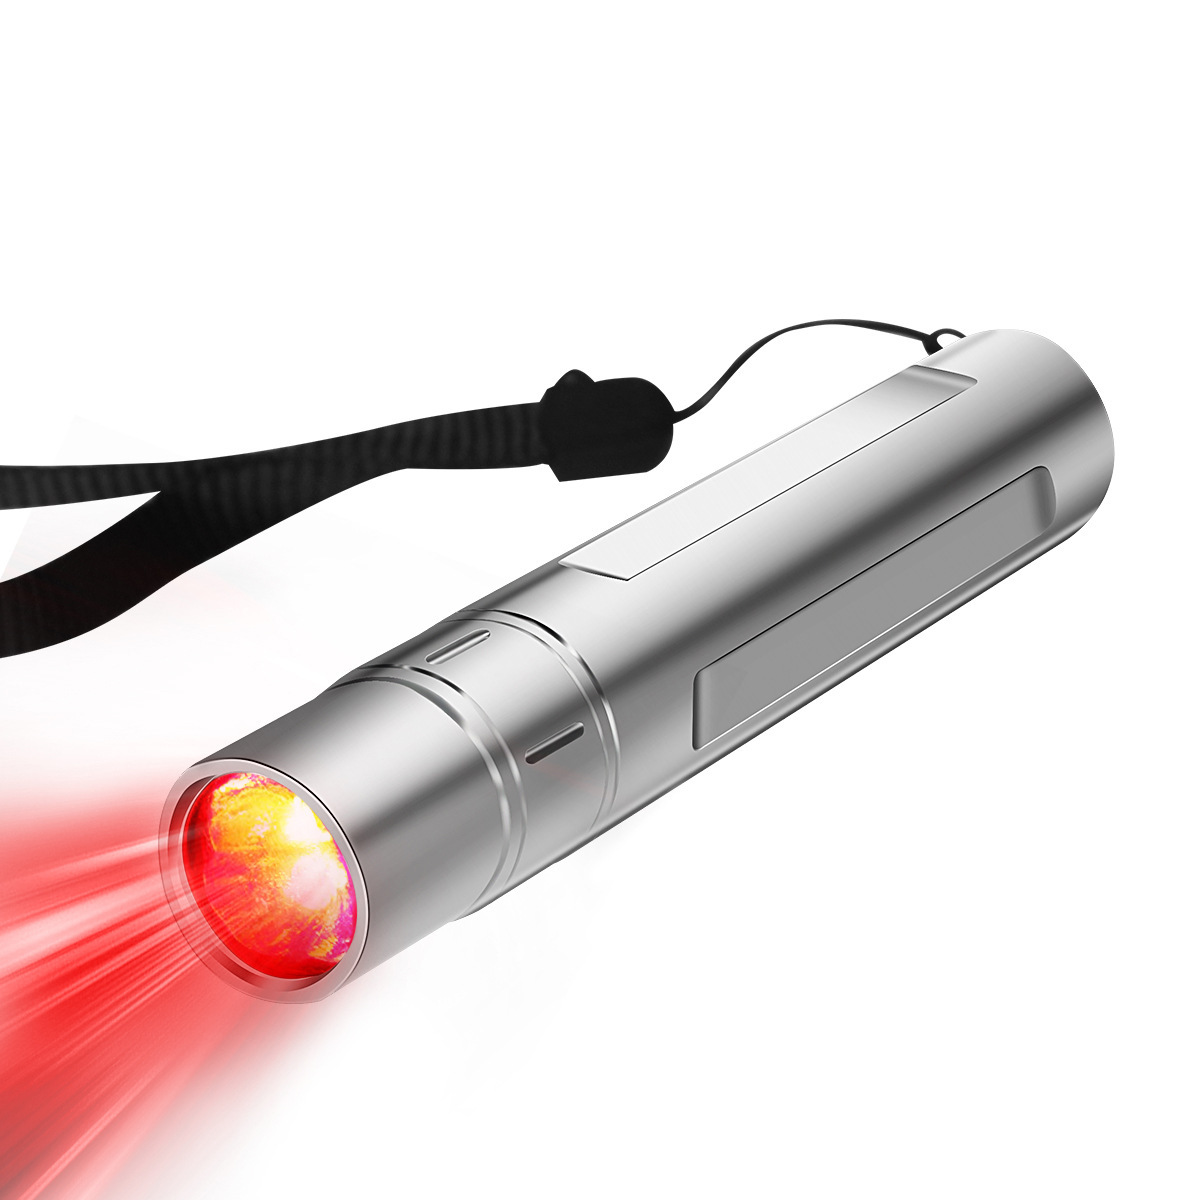 Res-5 Handheld Portable Five Light Therapy Pen